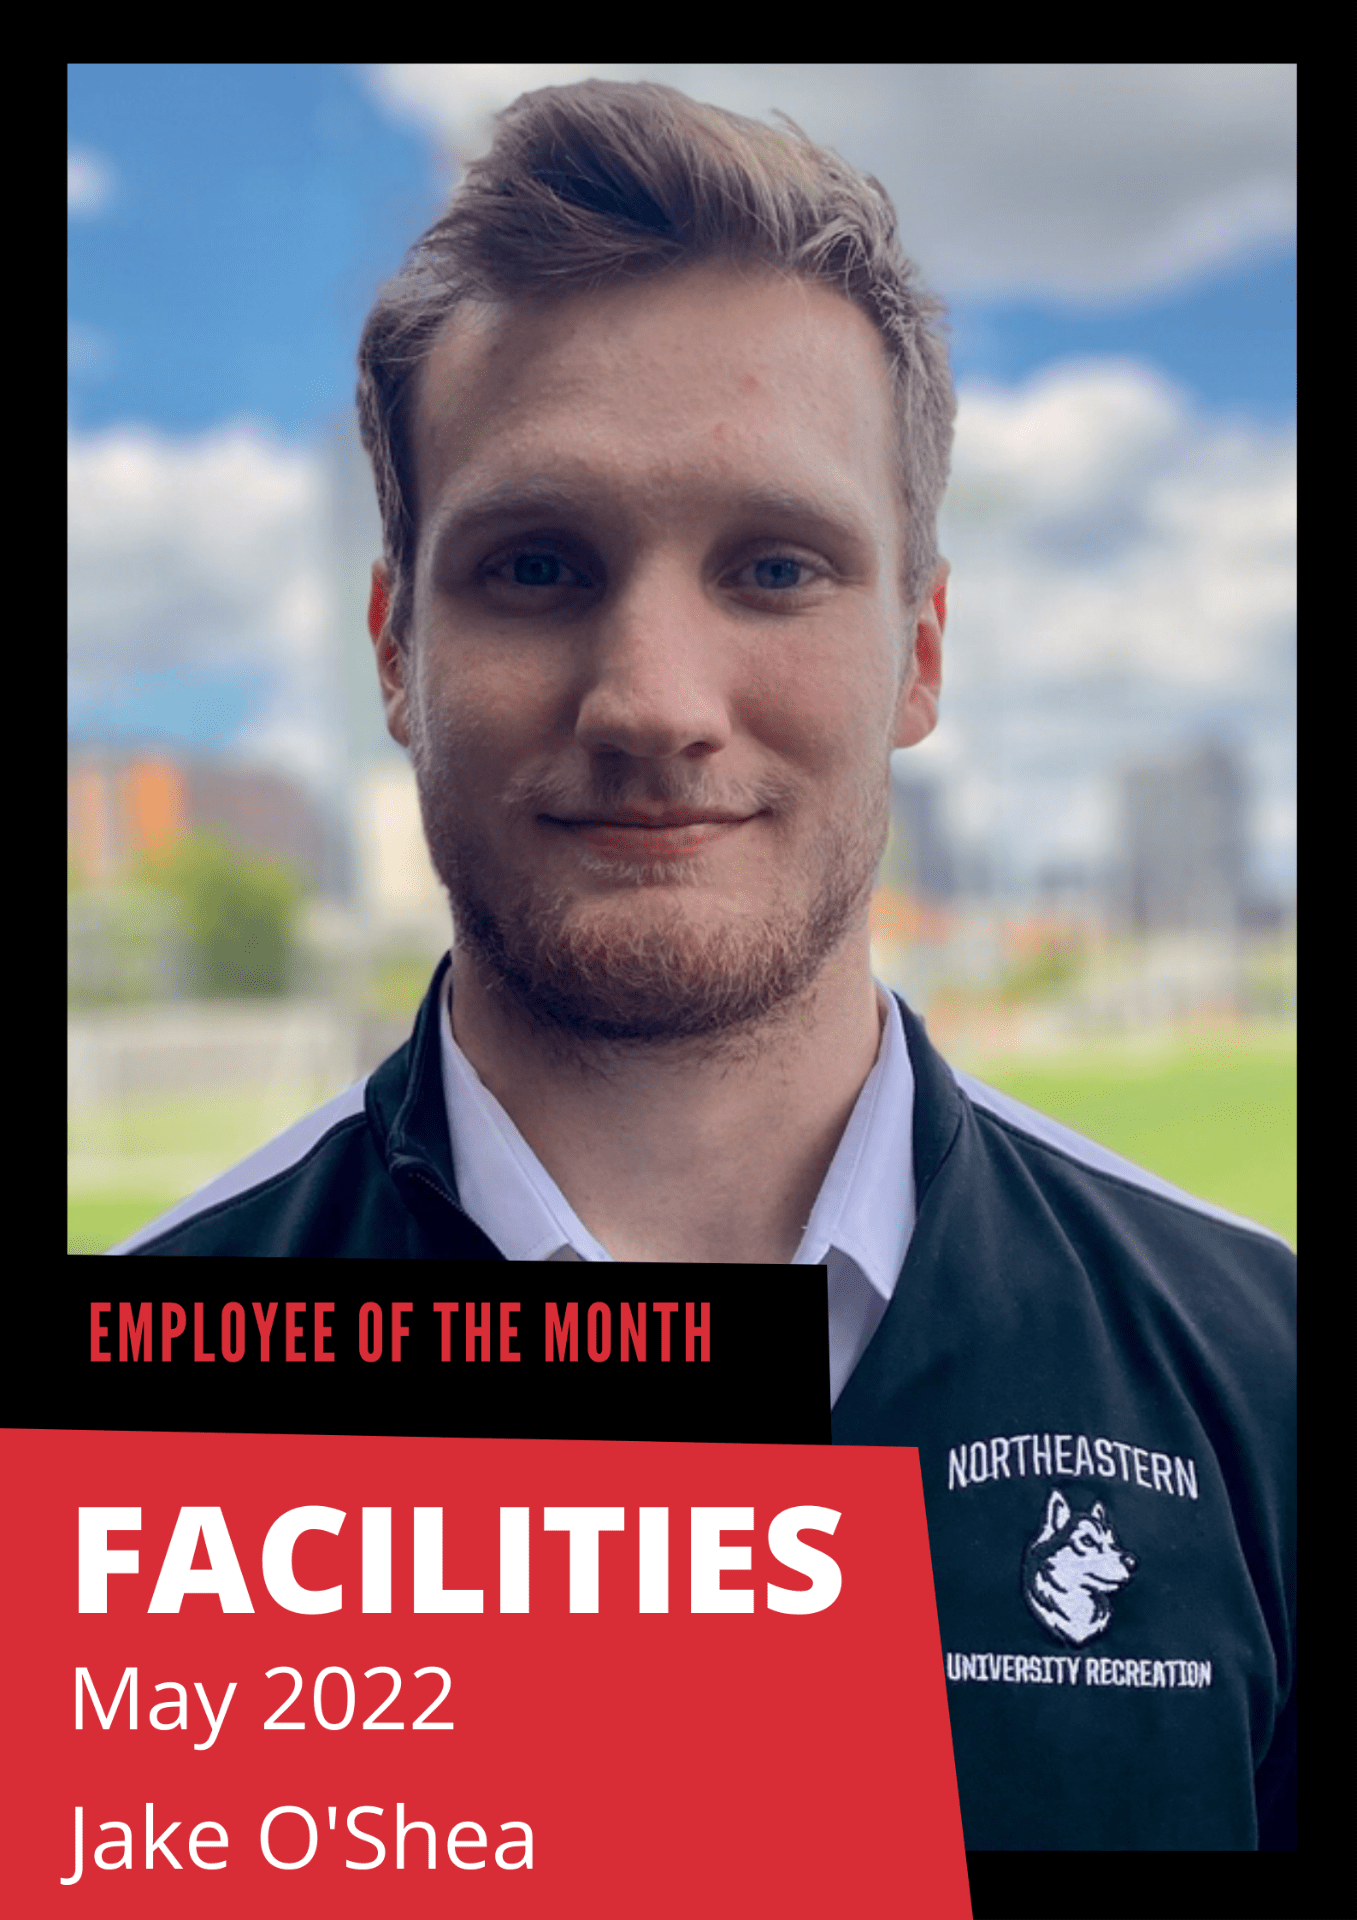 Employee of the Month, Facilities, May 2022, Jake O'Shea